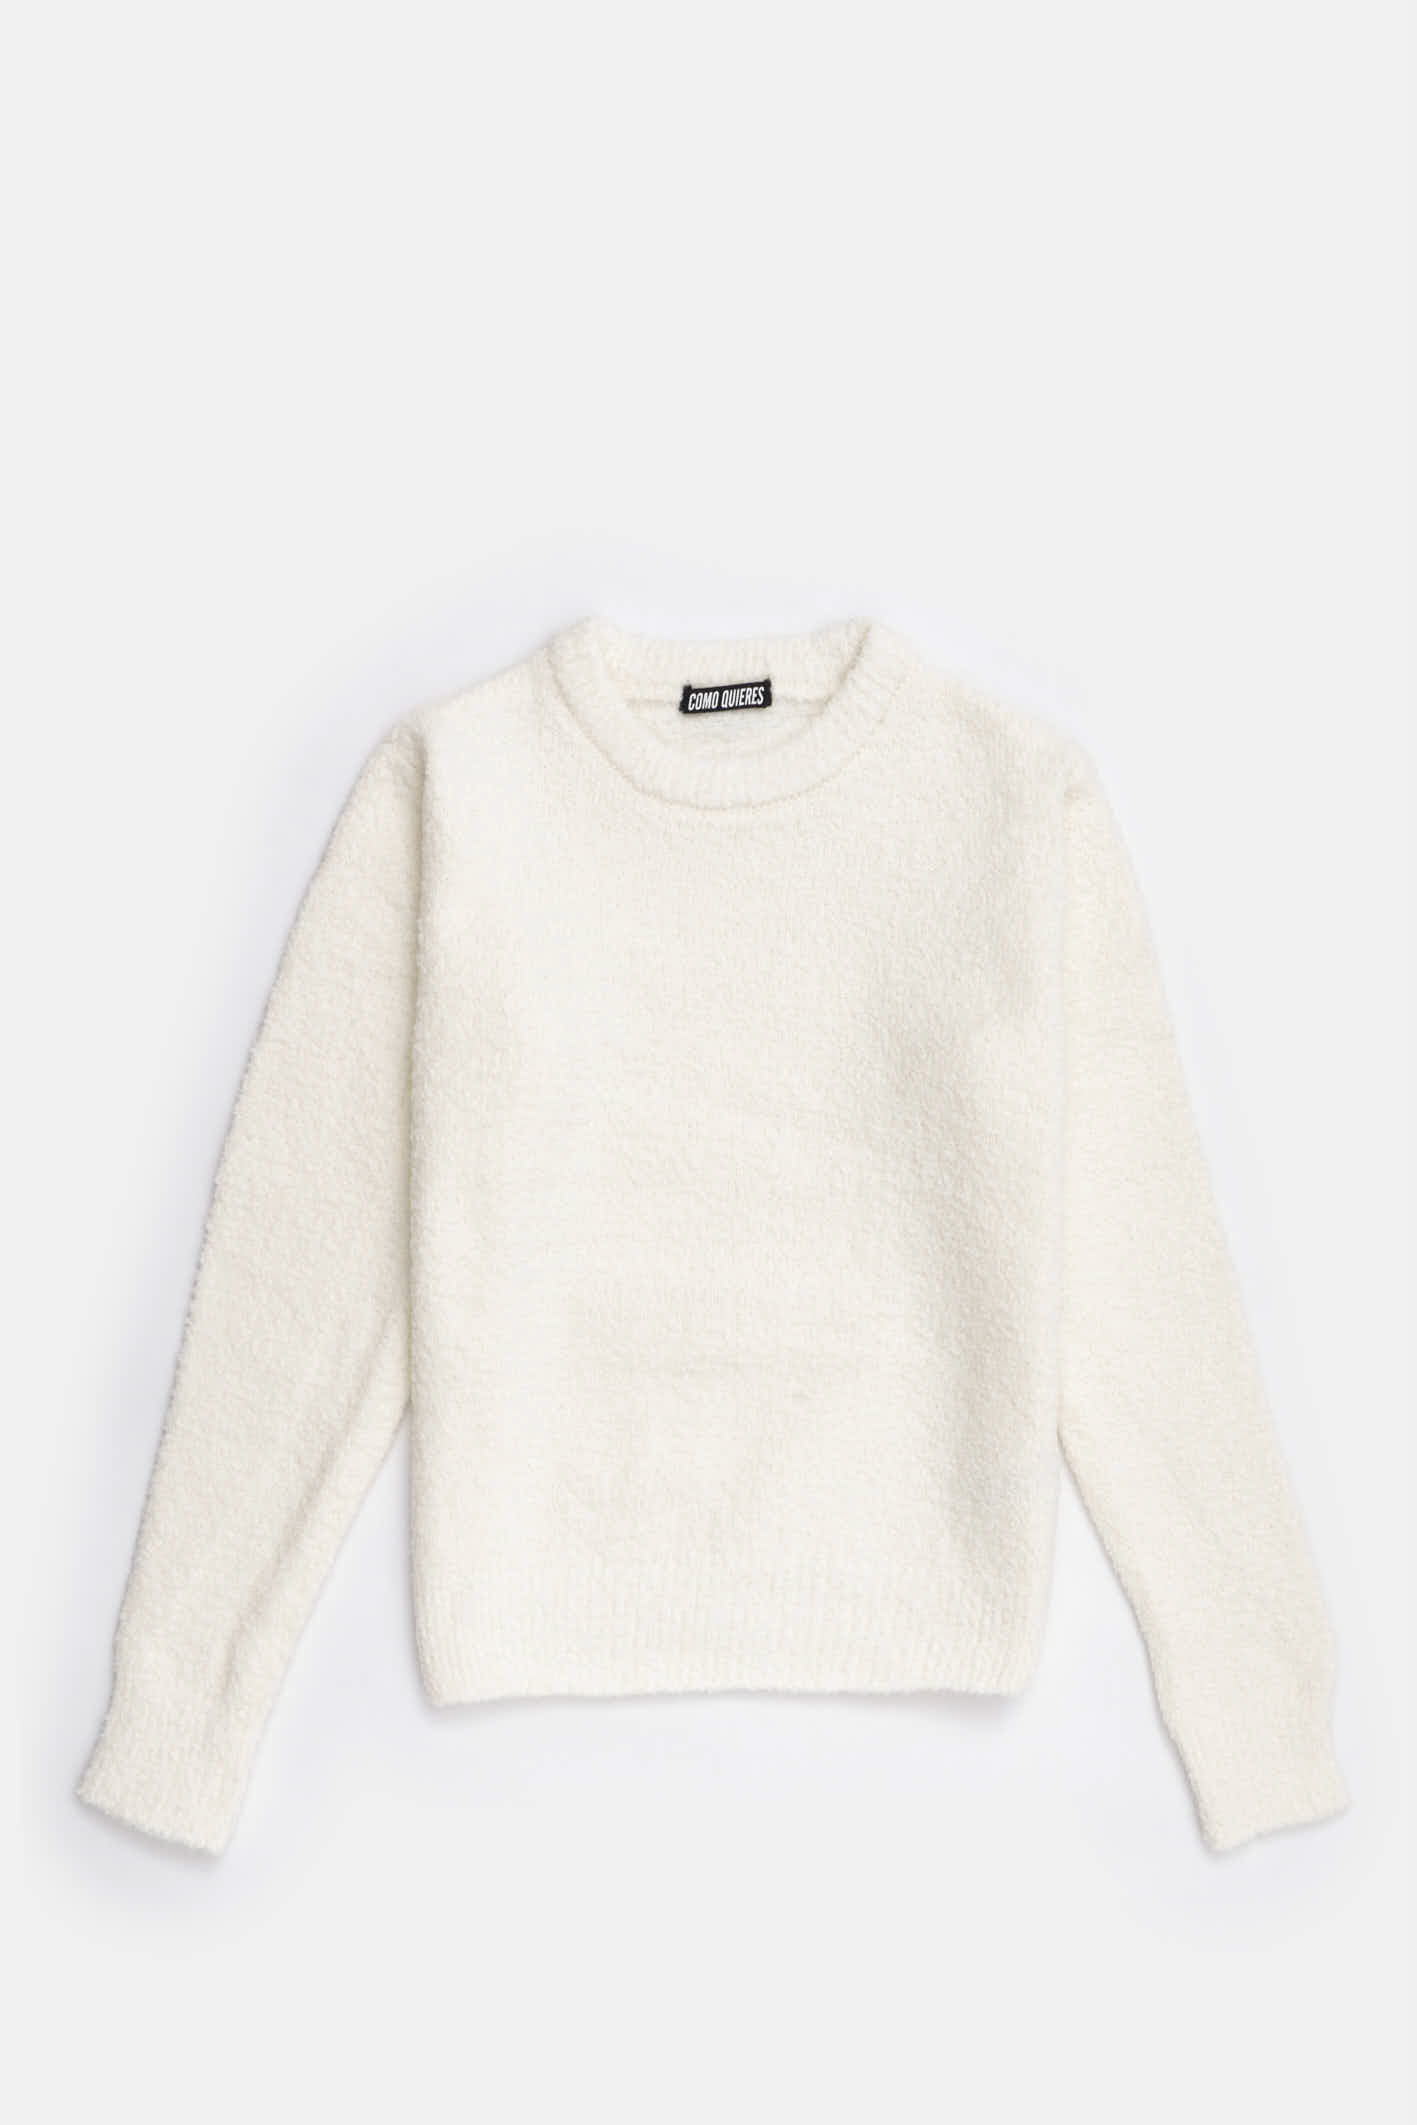 comoquieres_sweater-softly-xs_32-16-2024__picture-45692